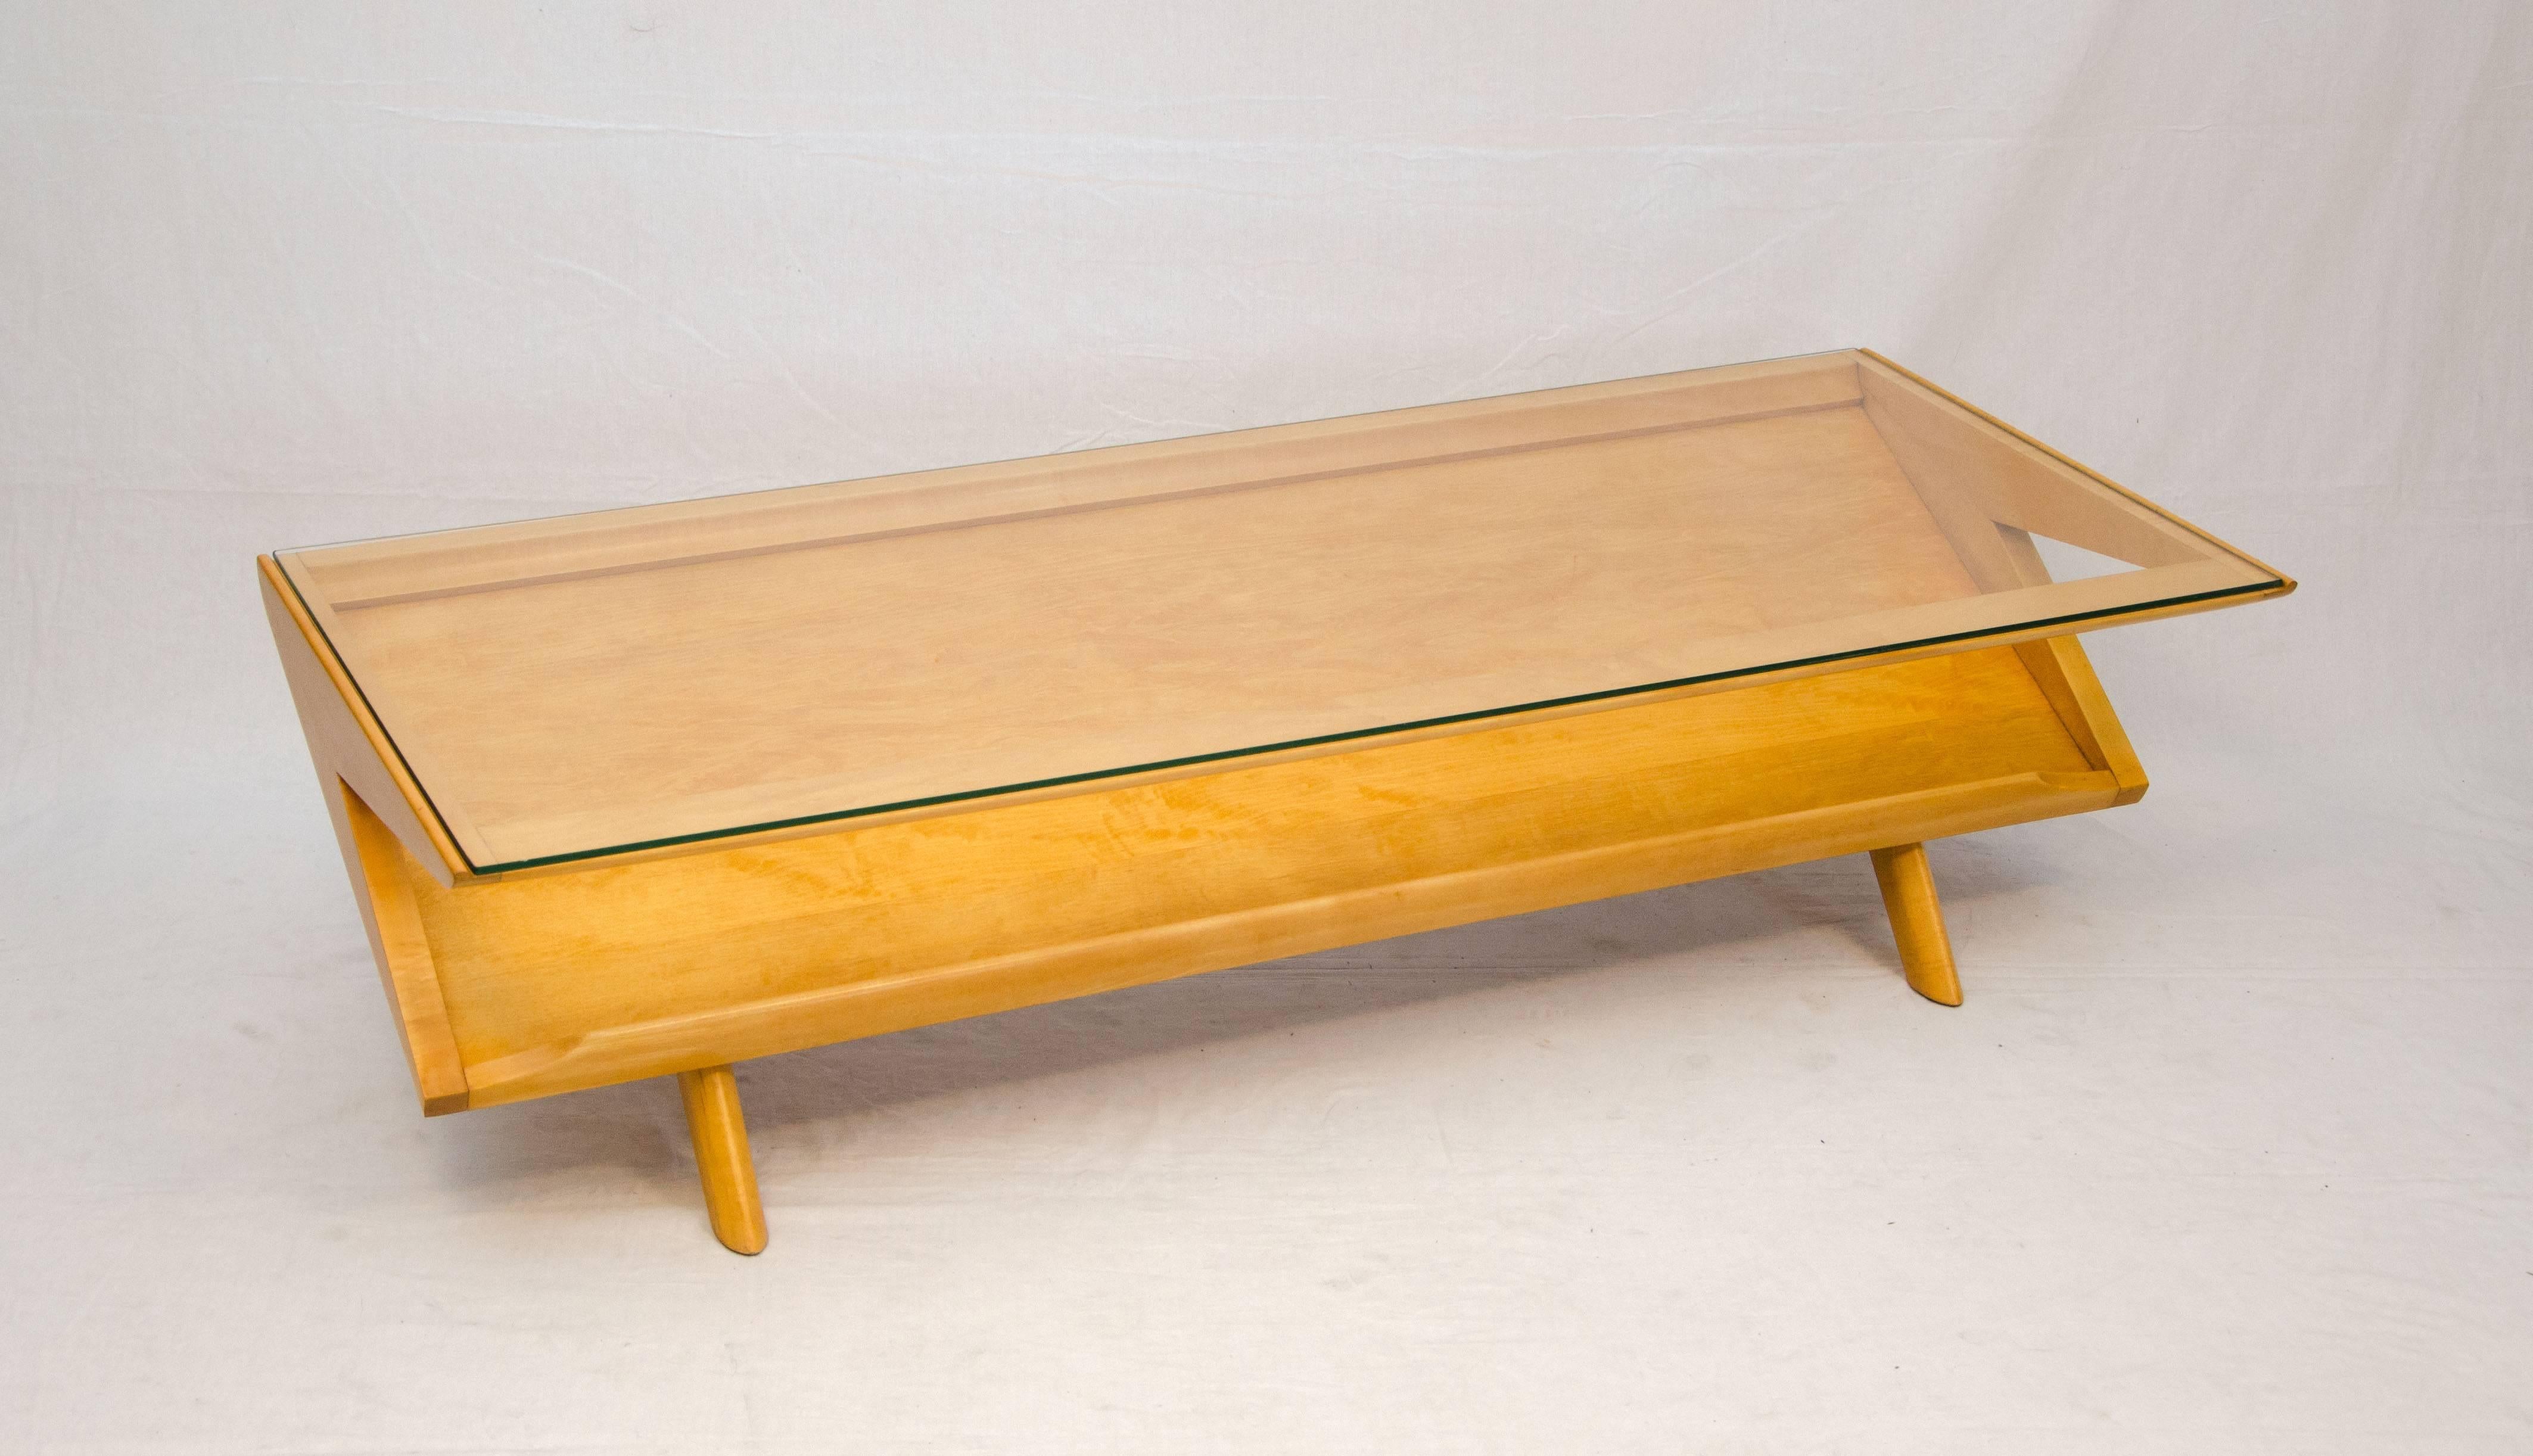 Iconic magazine coffee table designed by John Keal and manufactured by Brown Saltman Co. The glass top allows viewing of books or magazines displayed on the angled shelf. Retains the Brown Saltman painters palette company decal.